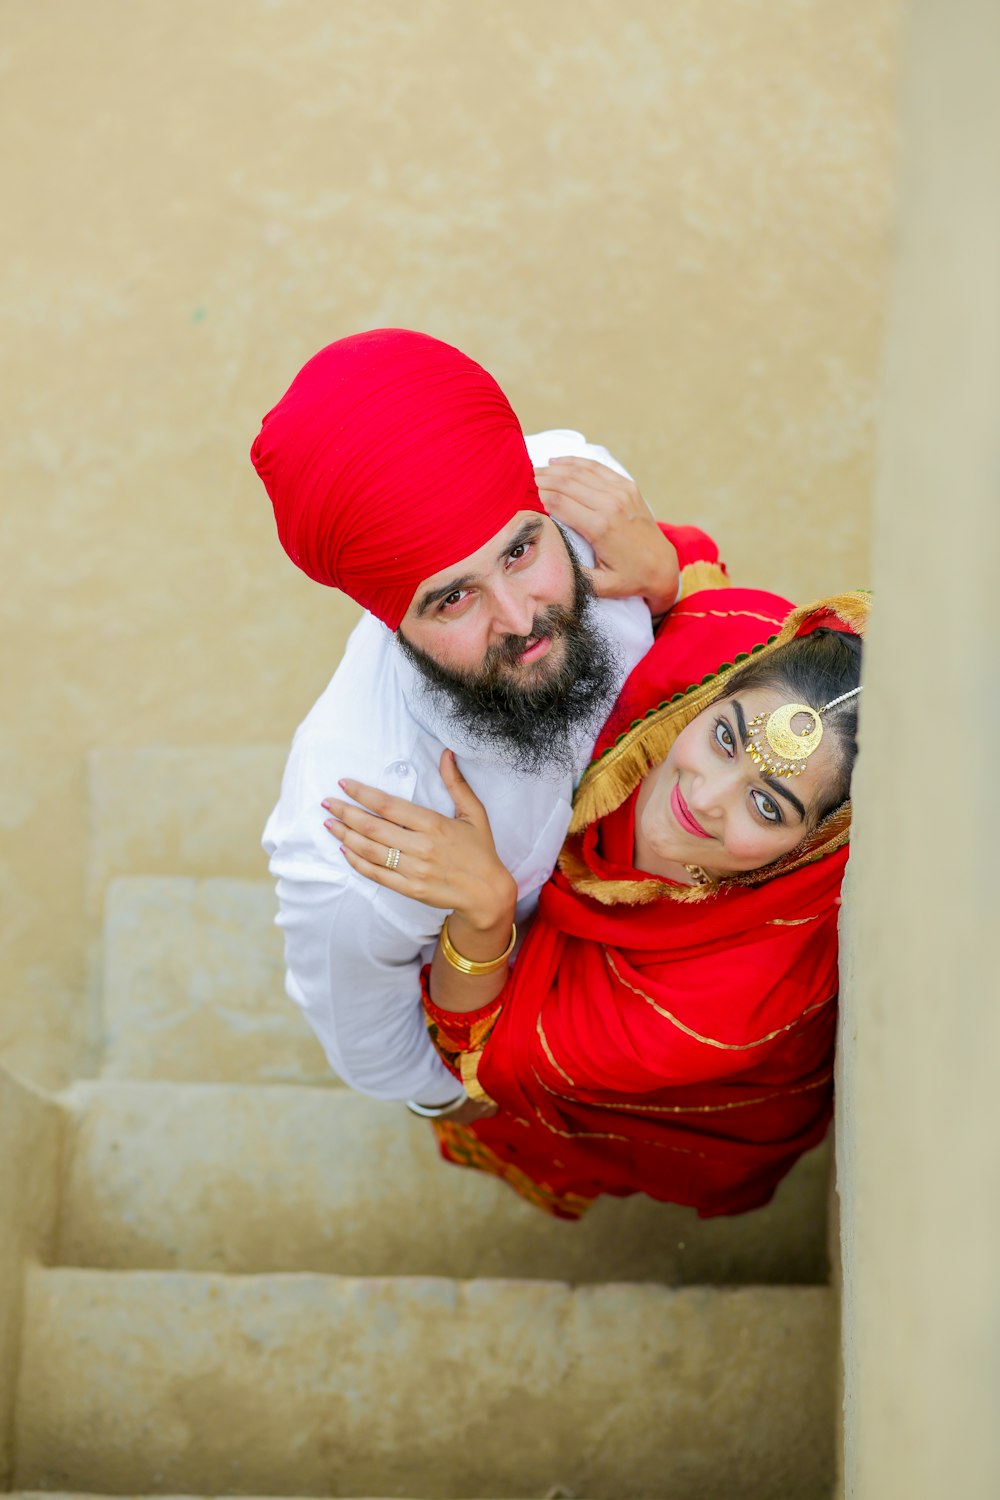 a man in a turban and a woman in a red dress